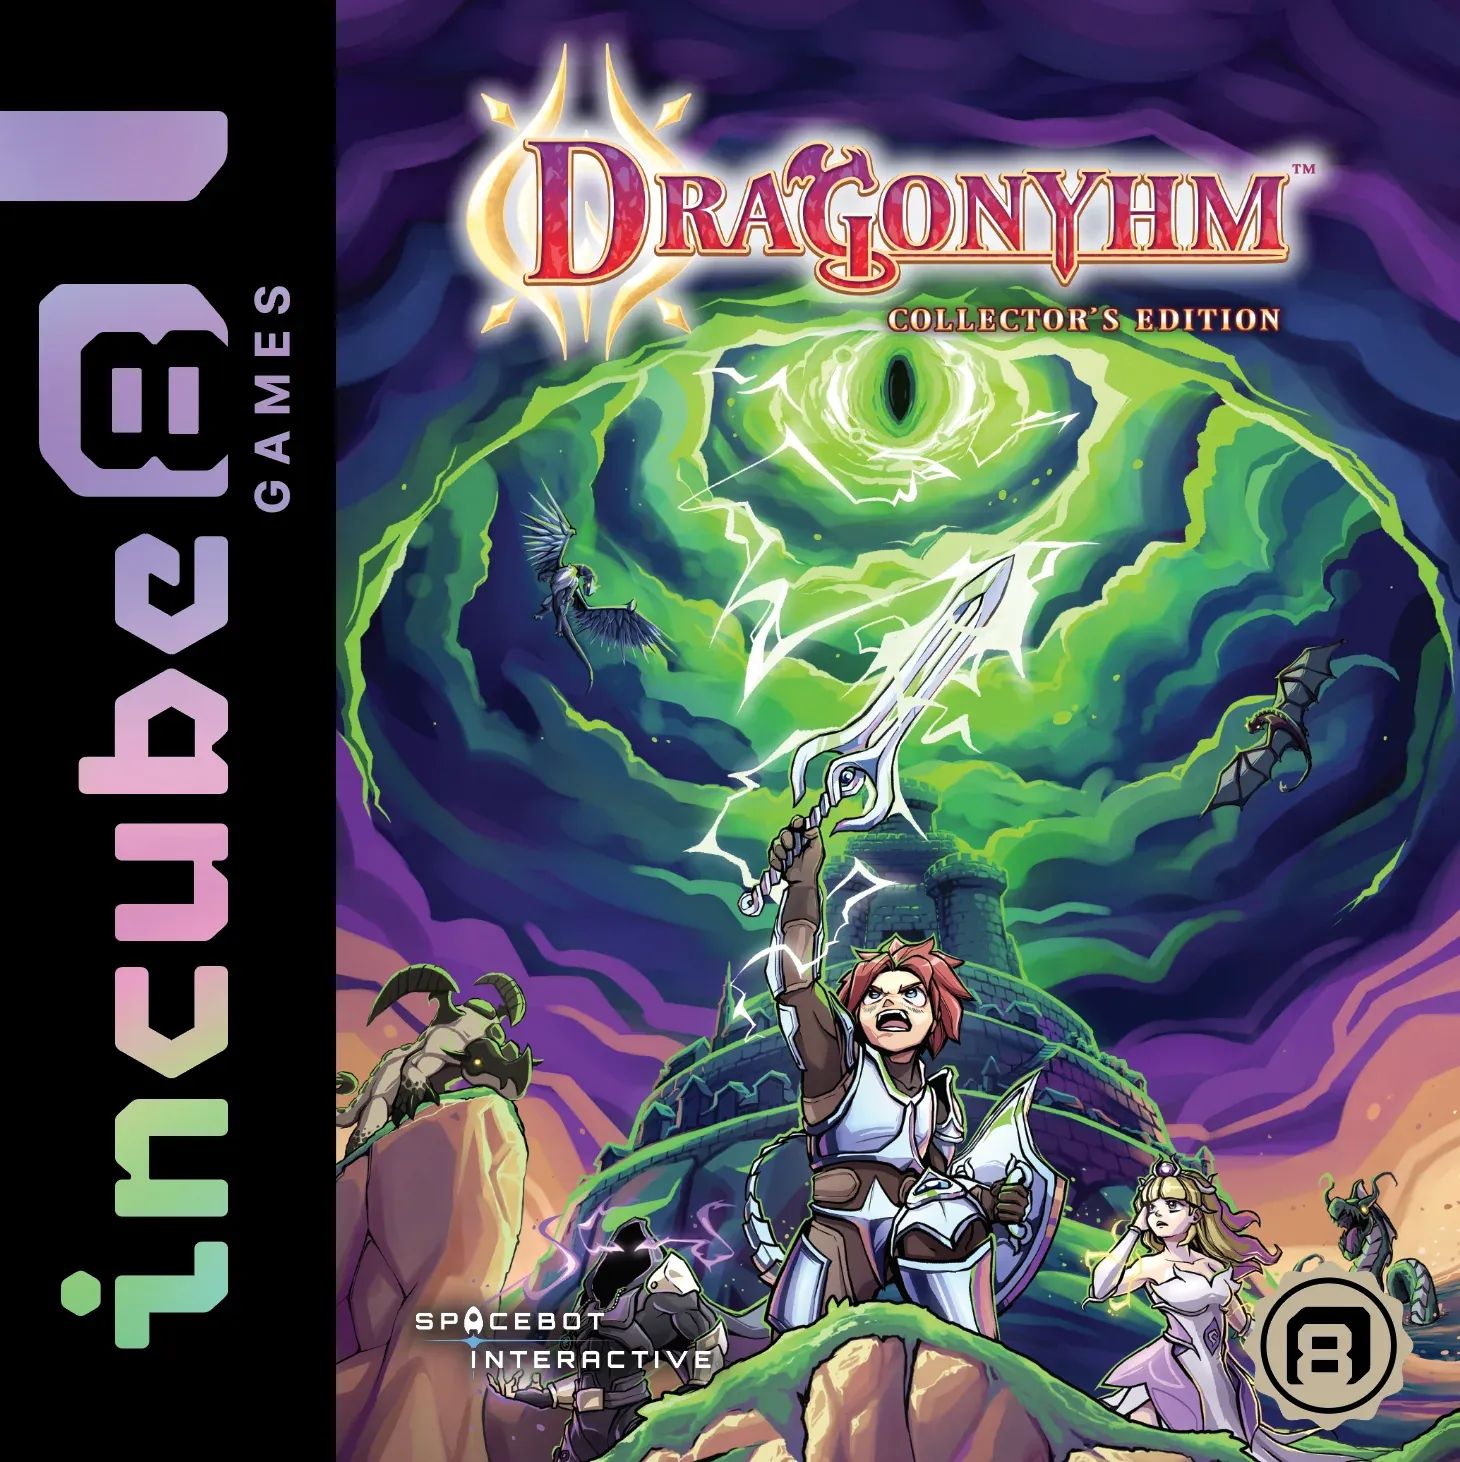 Embark on an Epic Quest with 'Dragonyhm' – Game Boy Color's Reimagined RPG Adventure